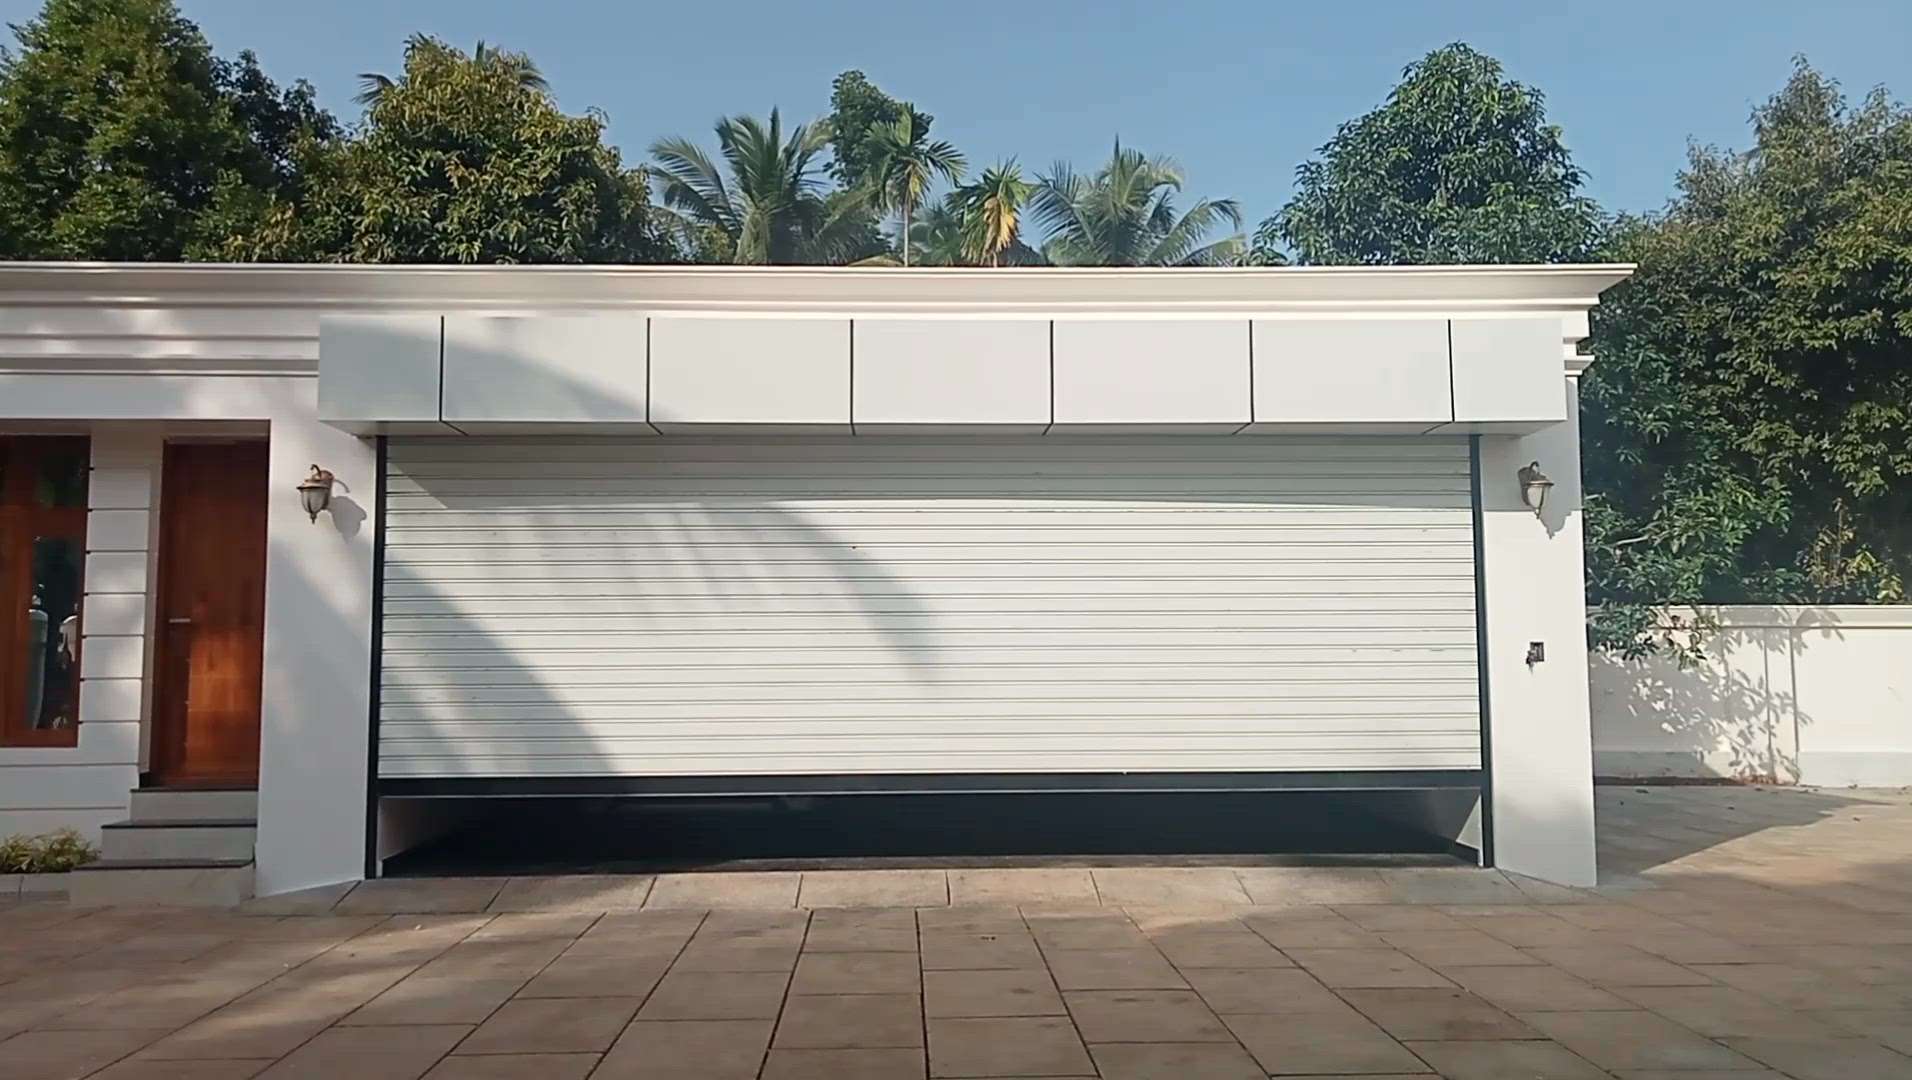 #automaticrollingshutter  #RollingShutters  #shuttering 

completed project at chemmad Malappuram district kerala 
 all kerala service available